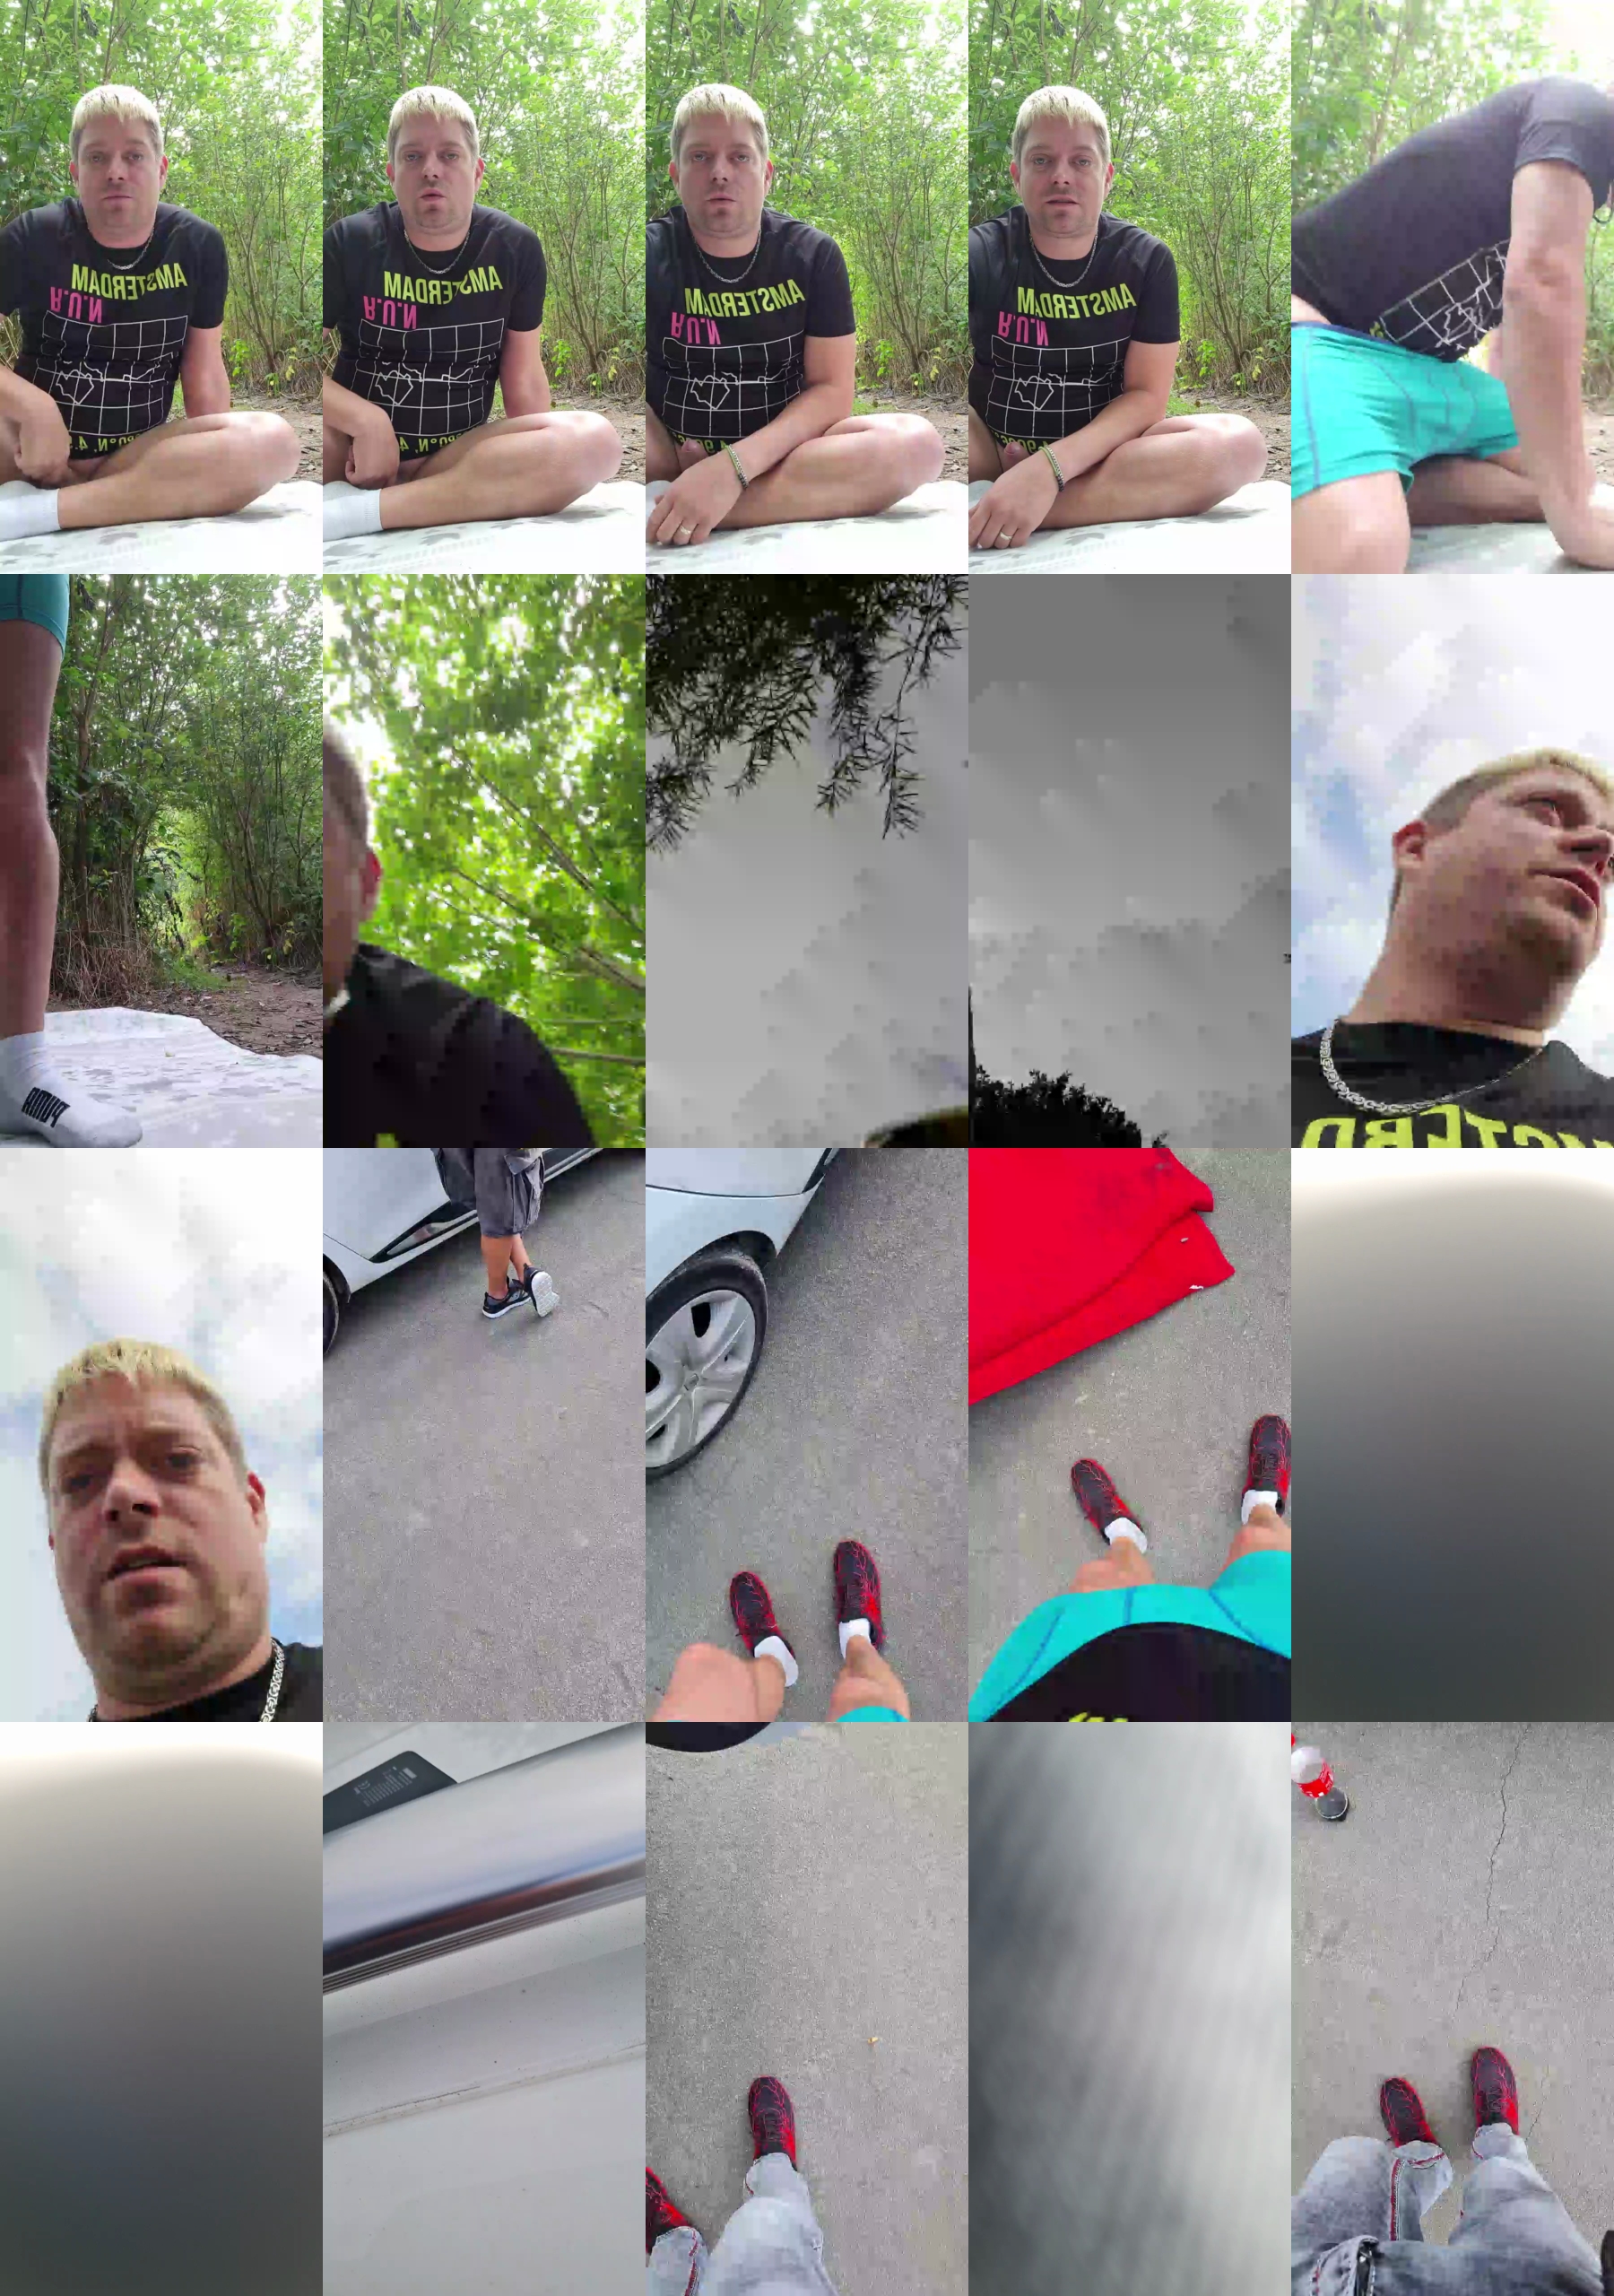 Geil32hb  03-09-2021 Recorded Video Naked